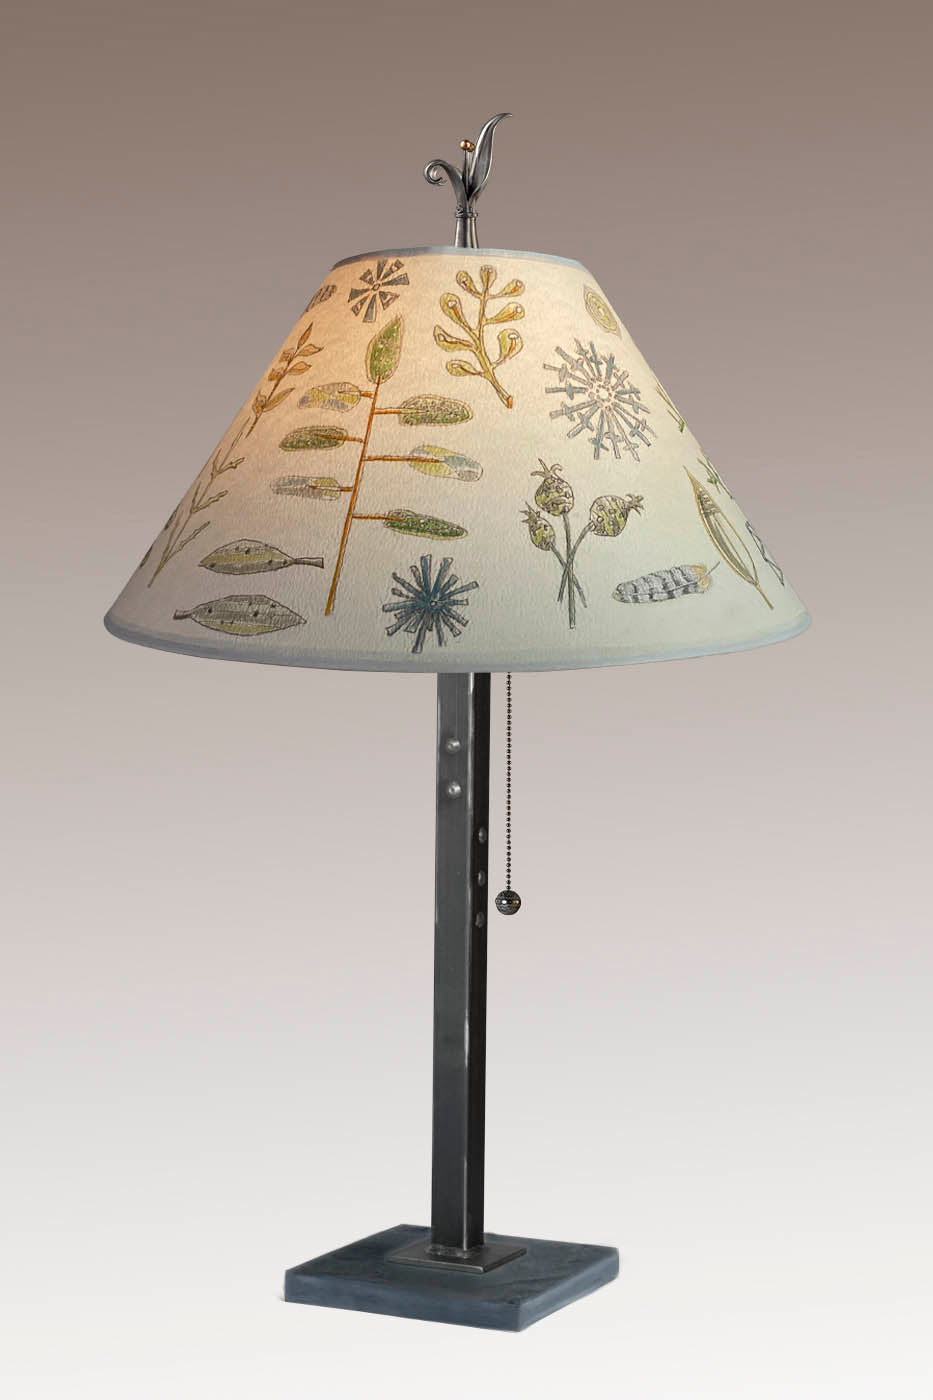 Janna Ugone &amp; Co Table Lamp Steel Table Lamp on Wood with Large Conical Shade in Field Chart